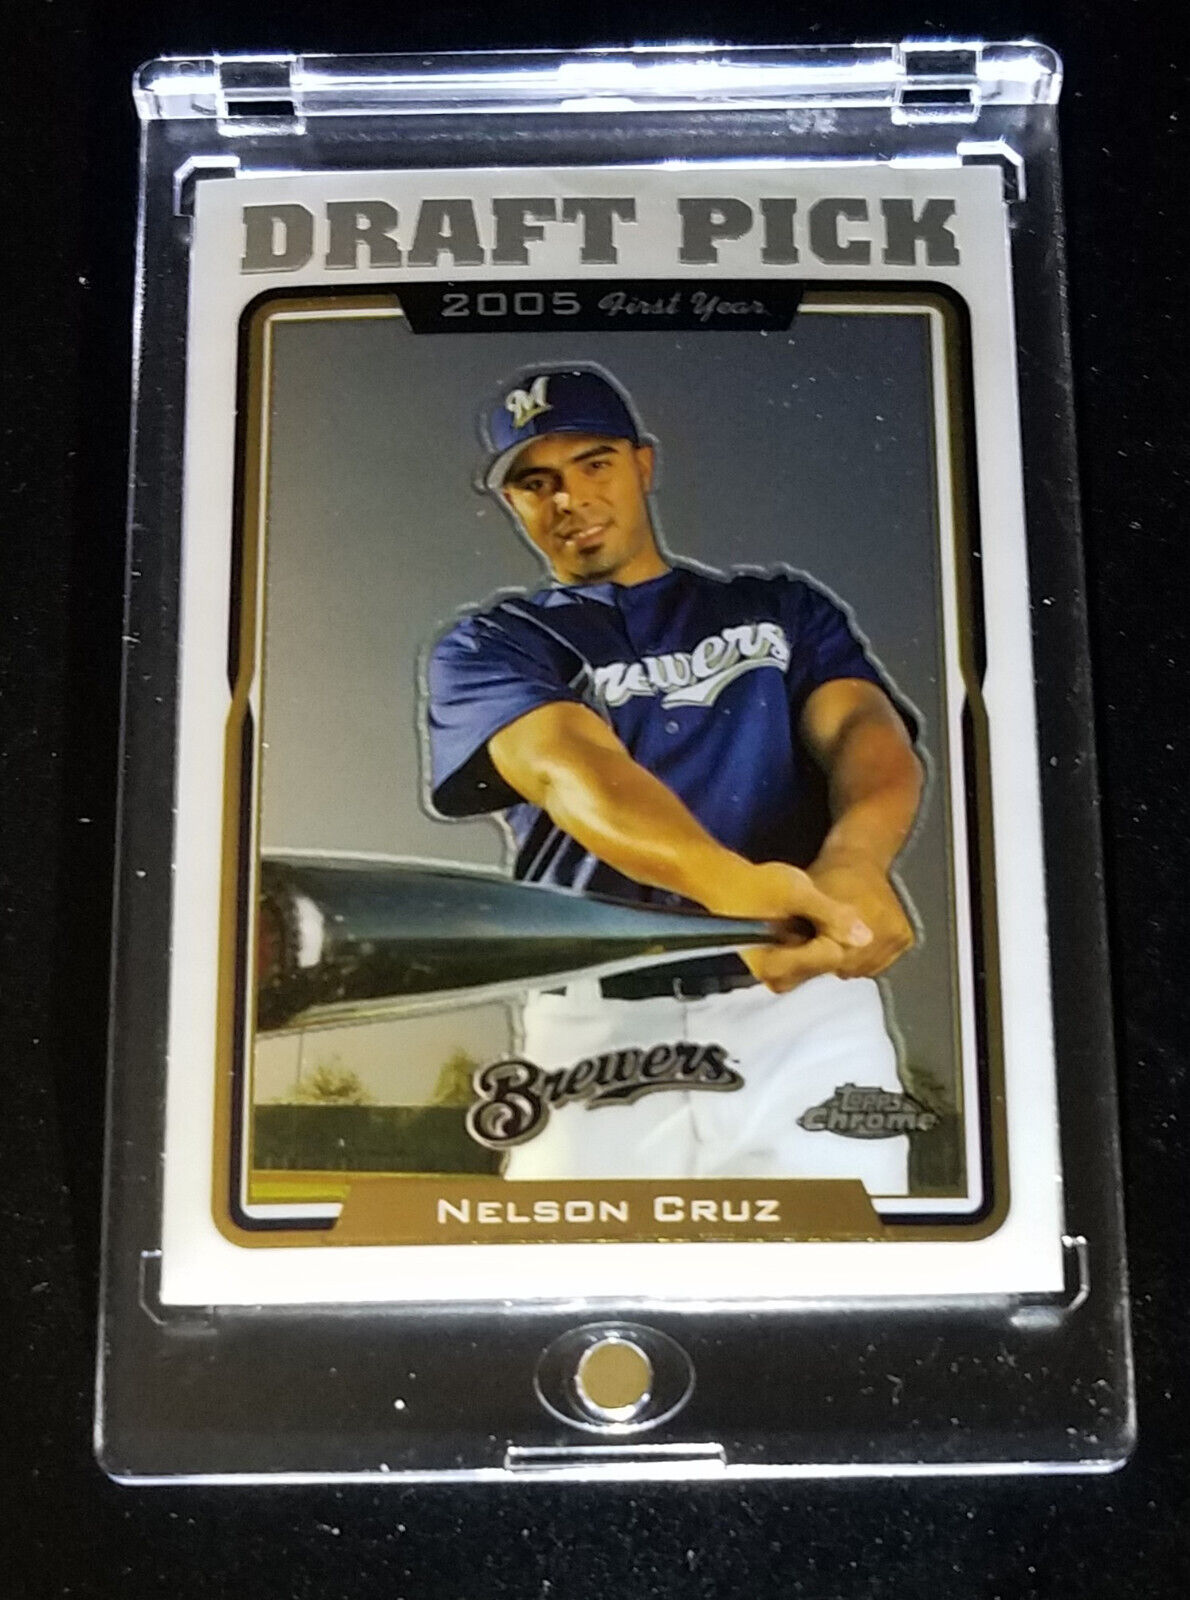 2005 Topps Chrome Update Nelson Cruz RC Draft Pick UH210 FY Clean Surface